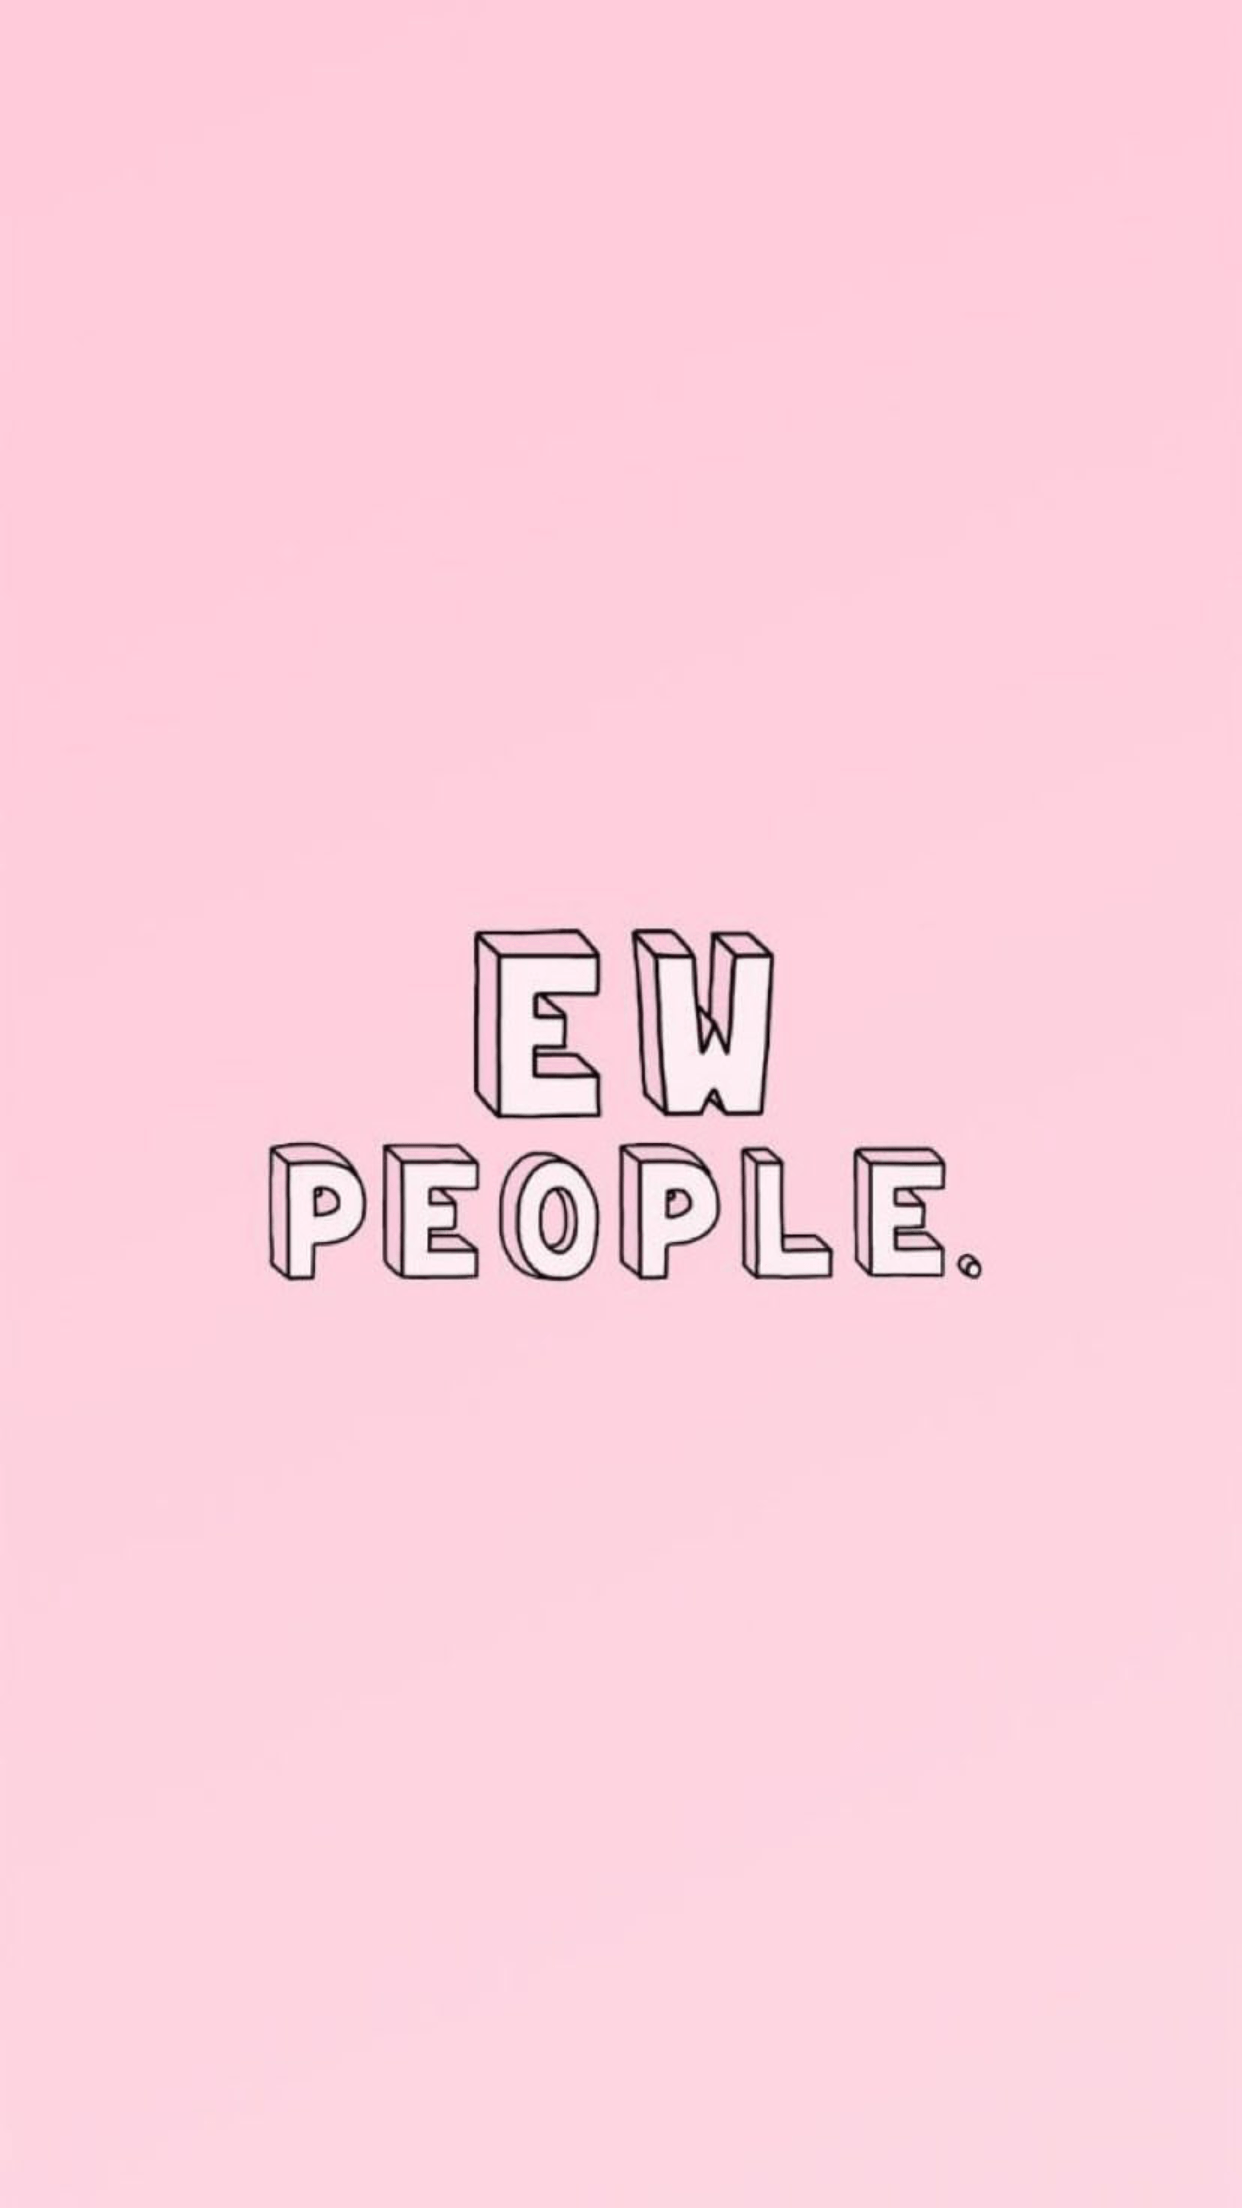 Eww ppl. quotes. Aesthetic iphone wallpaper